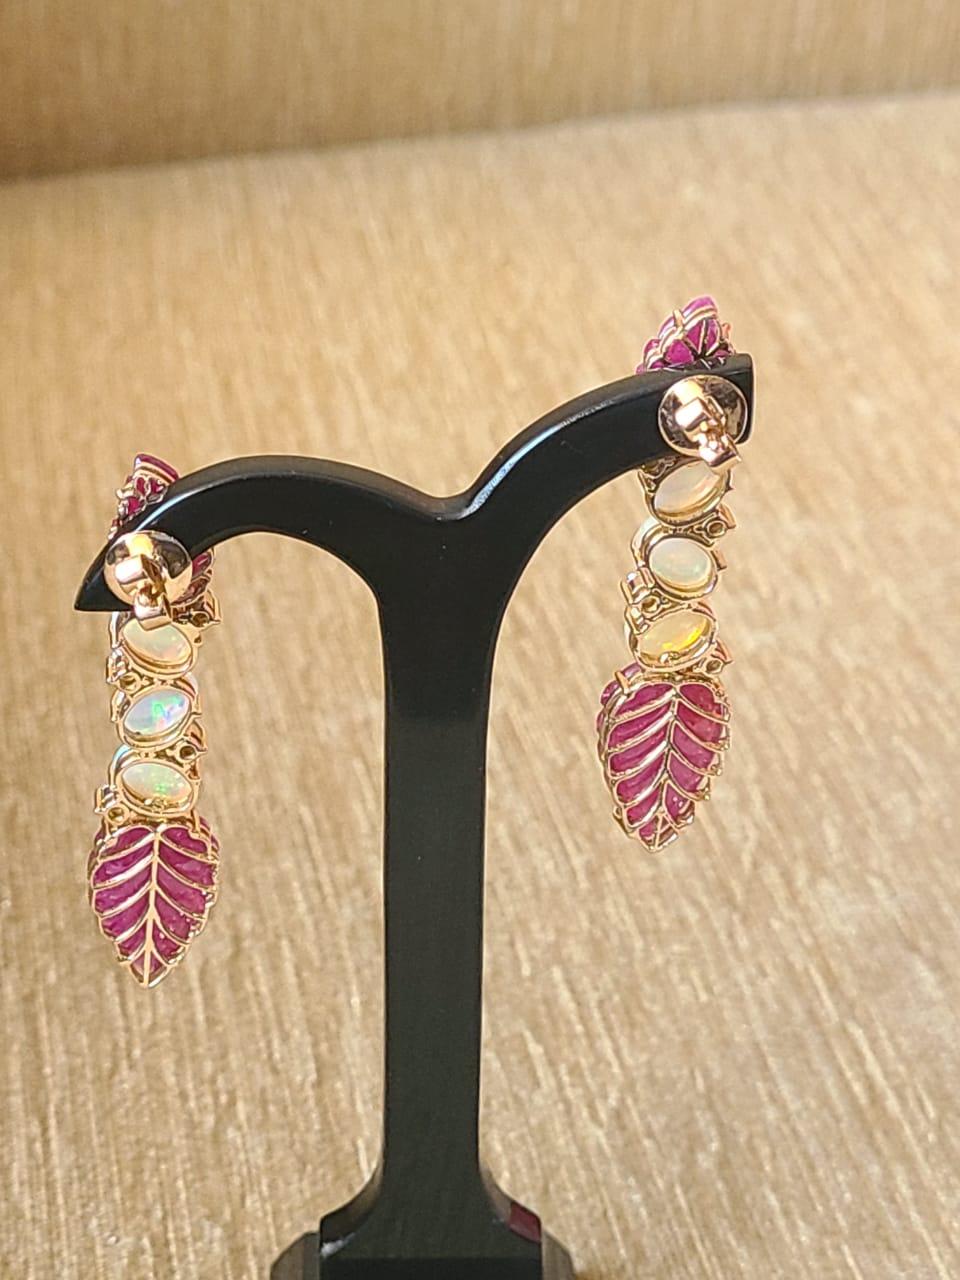 A very gorgeous and one of a kind, Ruby & Opal Chandelier/ Dangle earrings set in 18K Gold & Diamonds. The weight of the Rubies is 22.04 carats. The Rubies are of Mozambique origin and are completely natural, without any treatment. The Rubies are